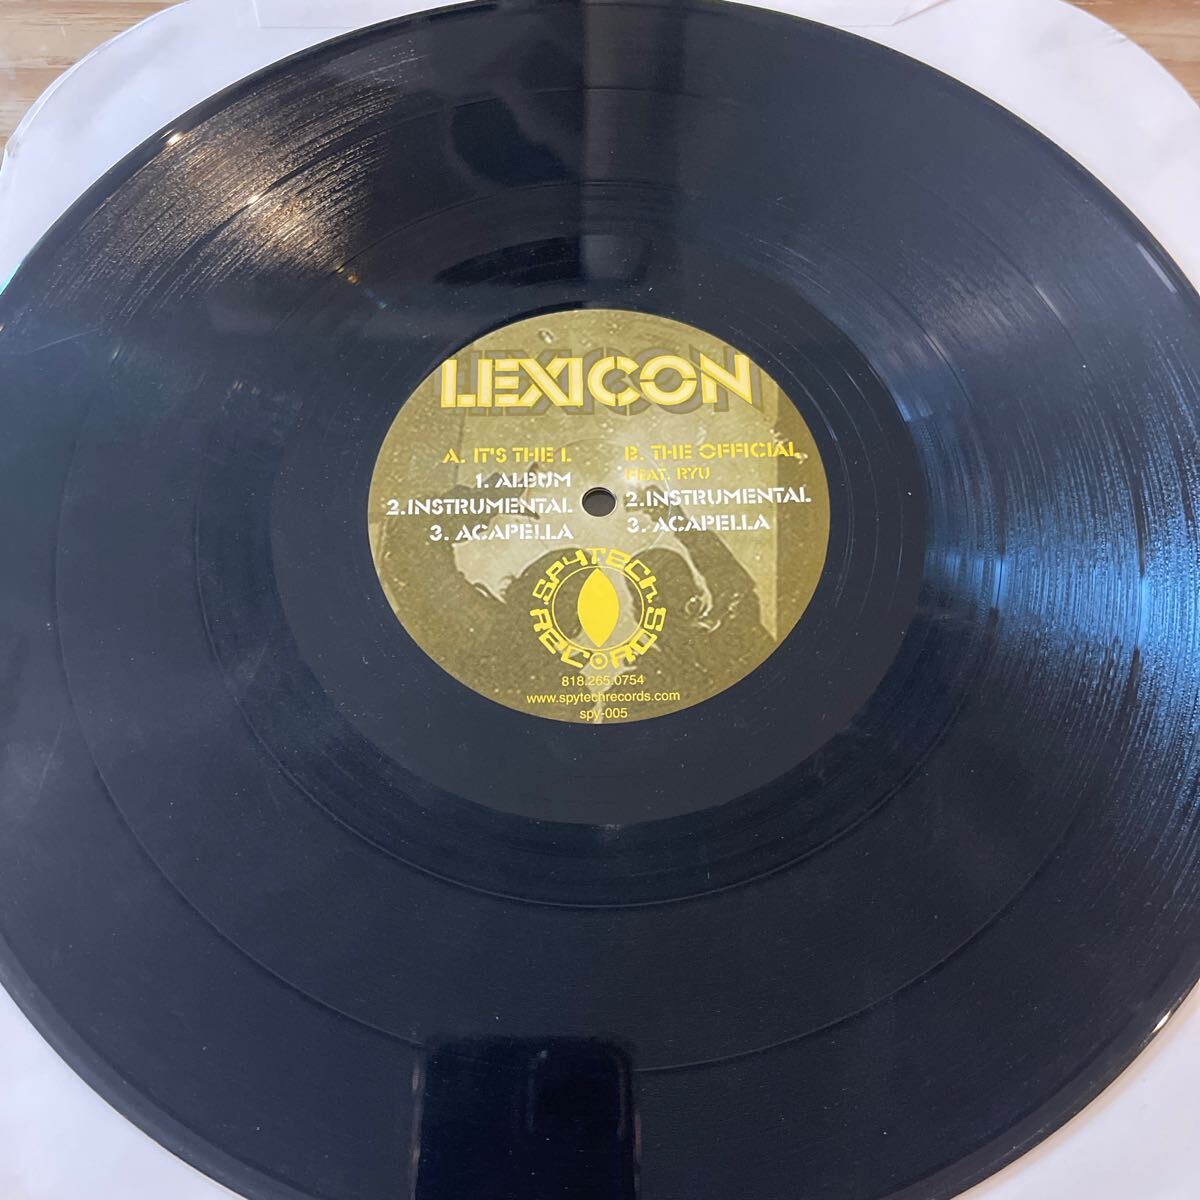 LEXICON / IT'S THE L / THE OFFICIAL /レコード/中古/DJ/CLUB_画像4